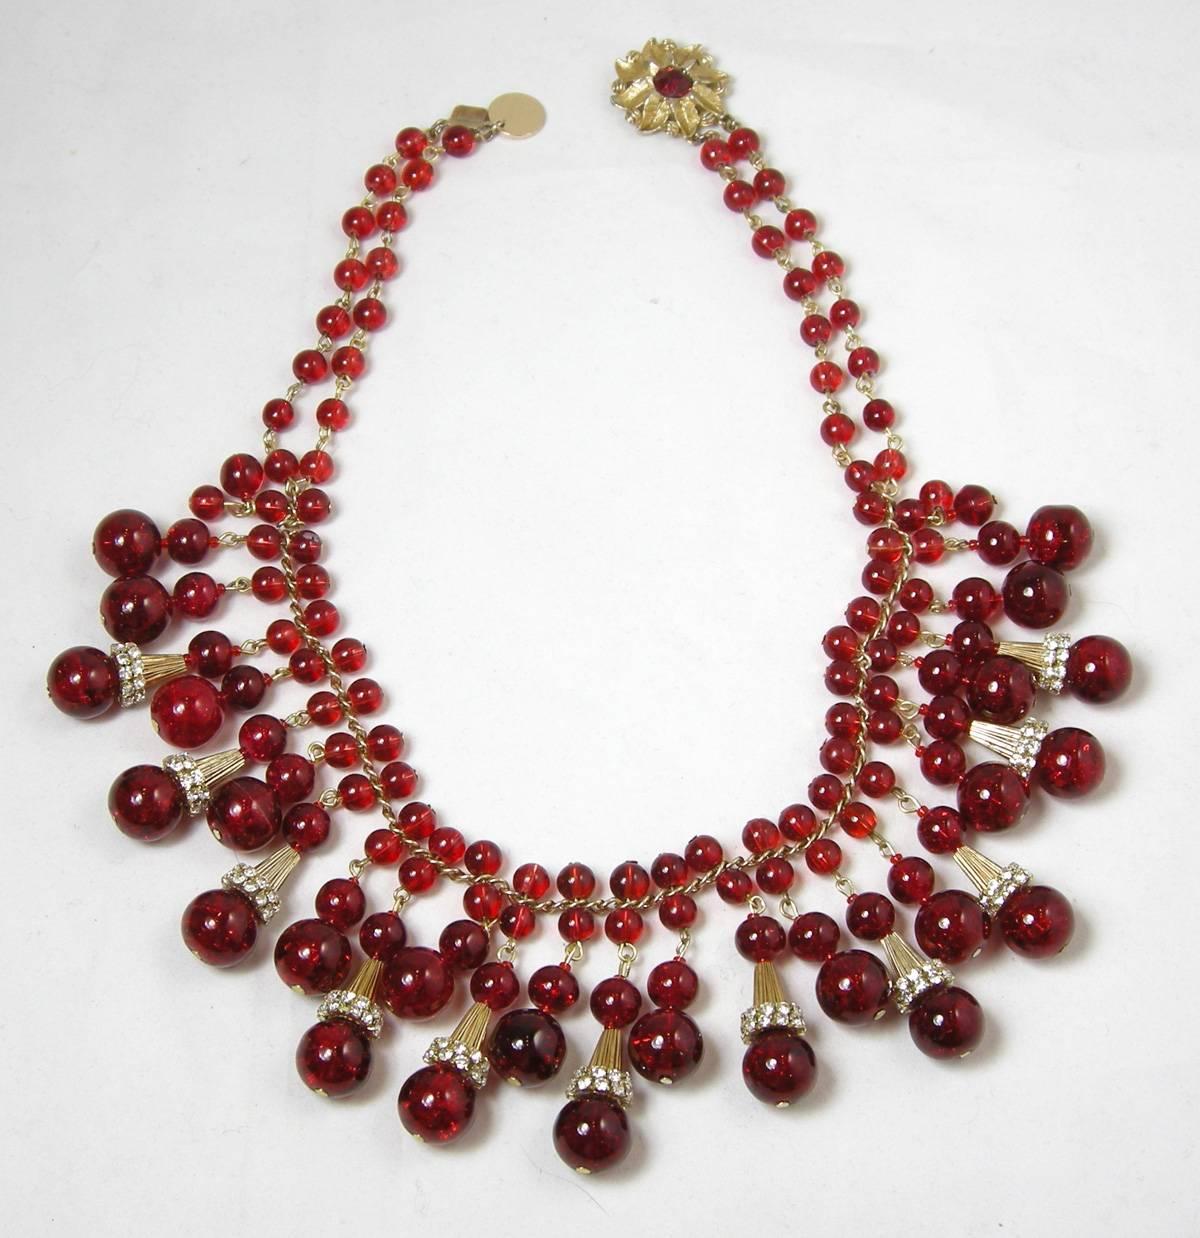 This vintage rare old Czech glass necklace is from the 1930s and leads down to round red glass beads alternating with ribbed rhinestone capped beads that hang down giving a bib look.  The slide in clasp is a gold tone flower with a red glass center.